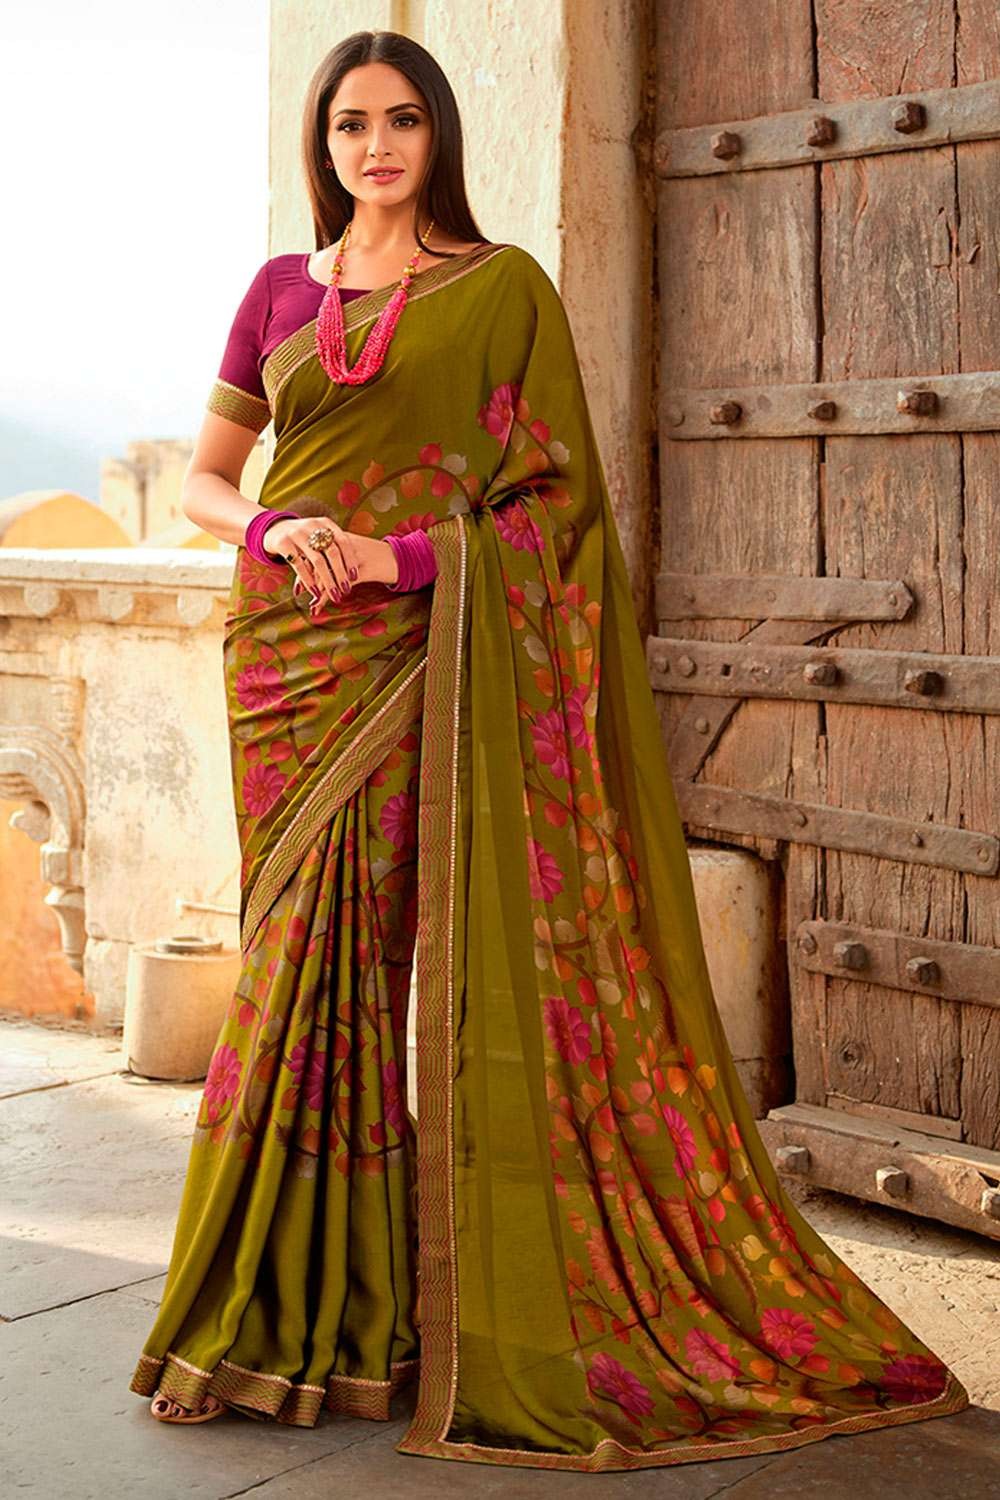 Buy Green Saree And Blouse Georgette & Underskirt Satin Floral